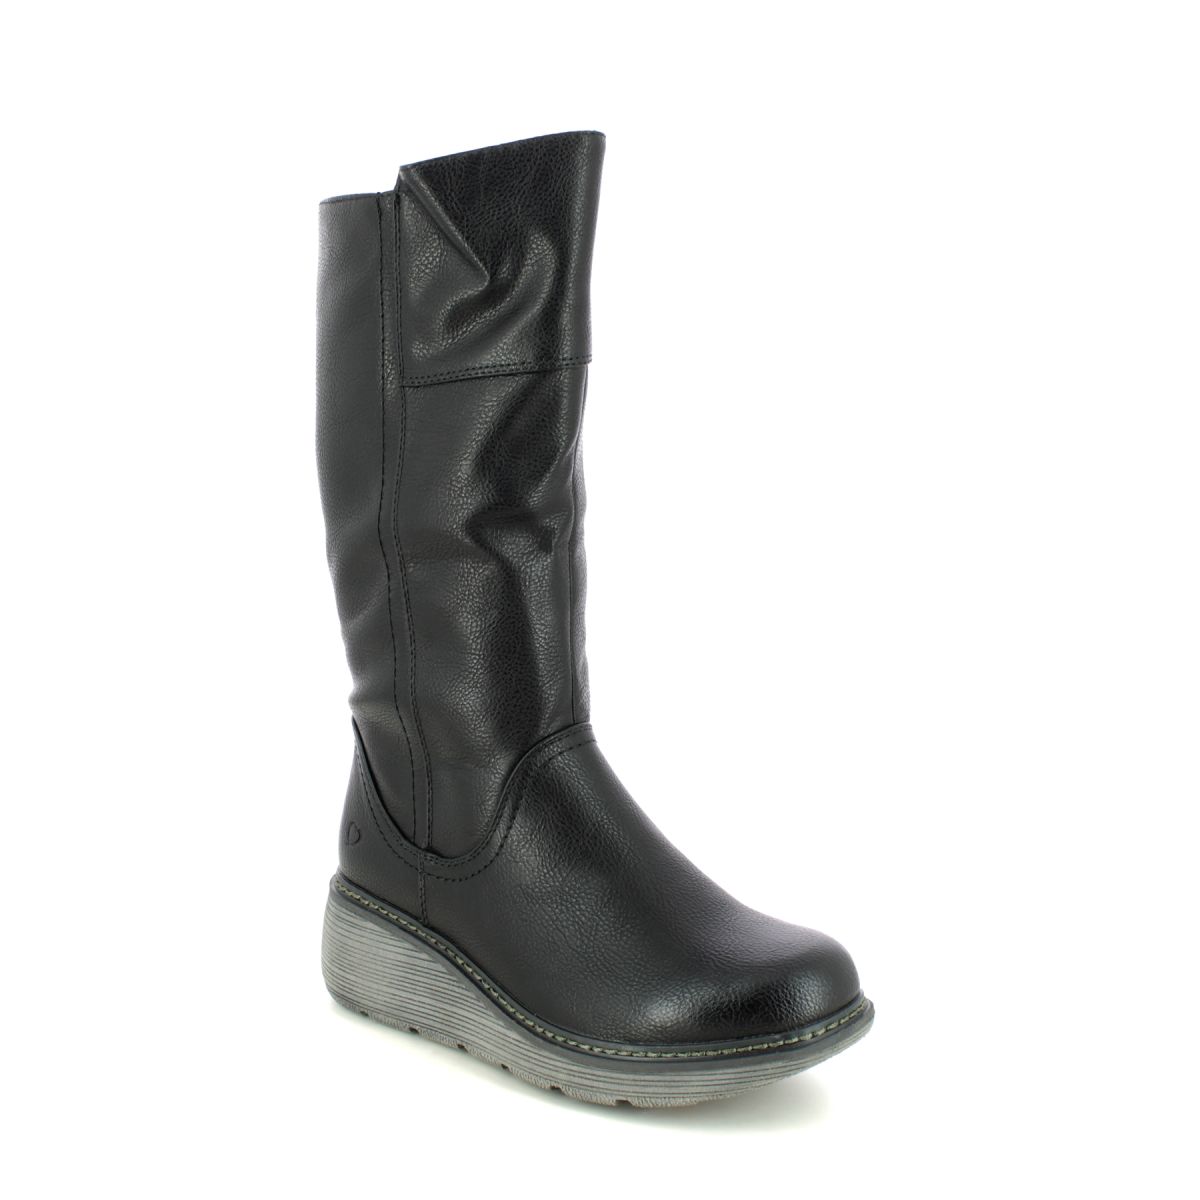 Heavenly Feet Lombardy Wedge Black Womens Mid Calf Boots 3005-34 In Size 7 In Plain Black